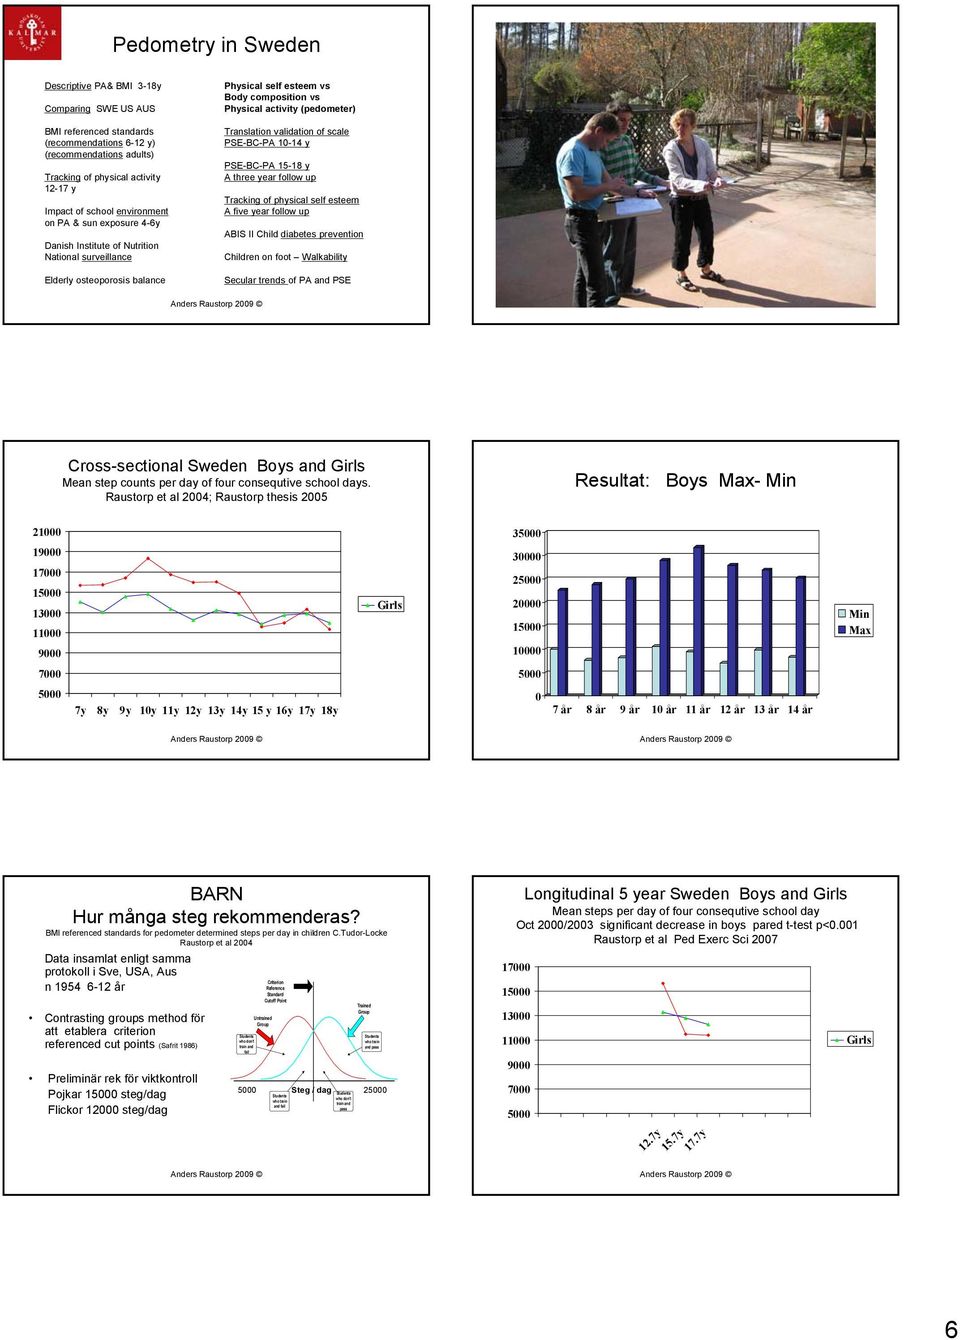 Translation validation of scale PSE-BC-PA 10-14 y PSE-BC-PA 15-18 y A three year follow up Tracking of physical self esteem A five year follow up ABIS II Child diabetes prevention Children on foot